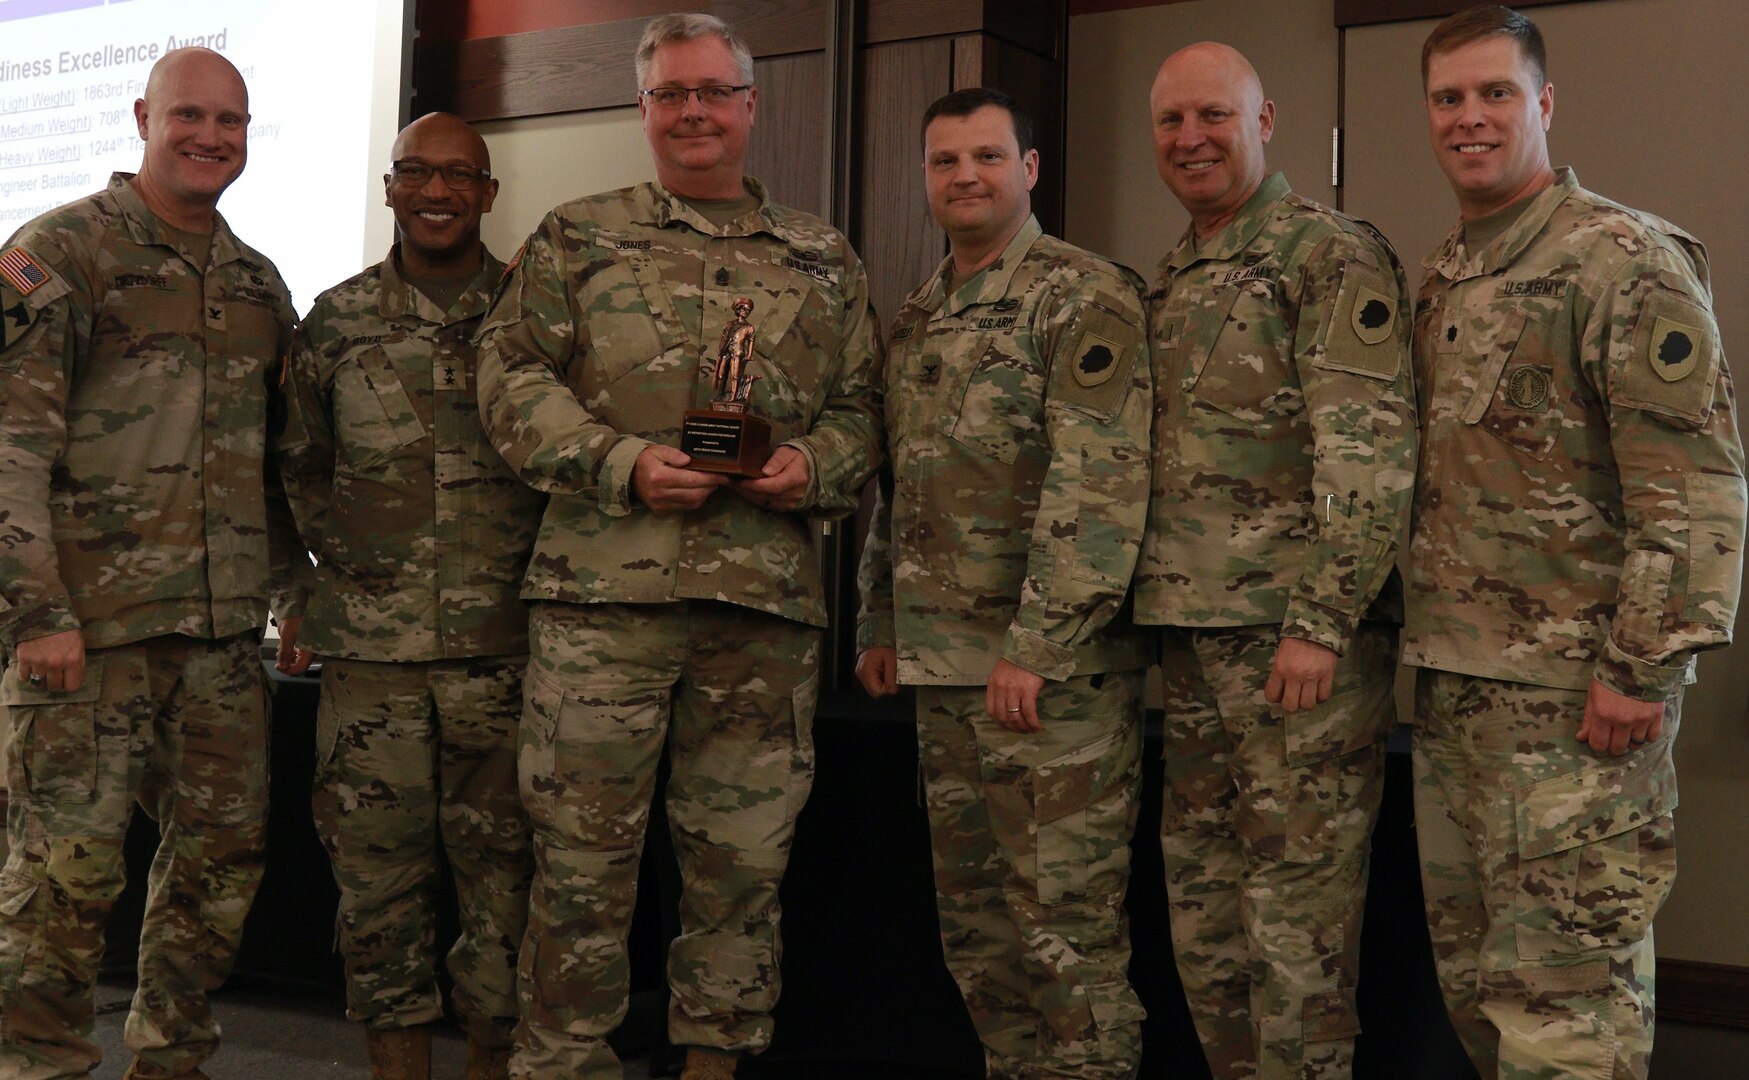 Illinois Army National Guard Command Sgt. Maj. Greg Jones of Port Byron, Illinois, was awarded the Meritorious Service Medal for his work as the senior noncommissioned officer of the Peoria-based 65th Troop Command Brigade.